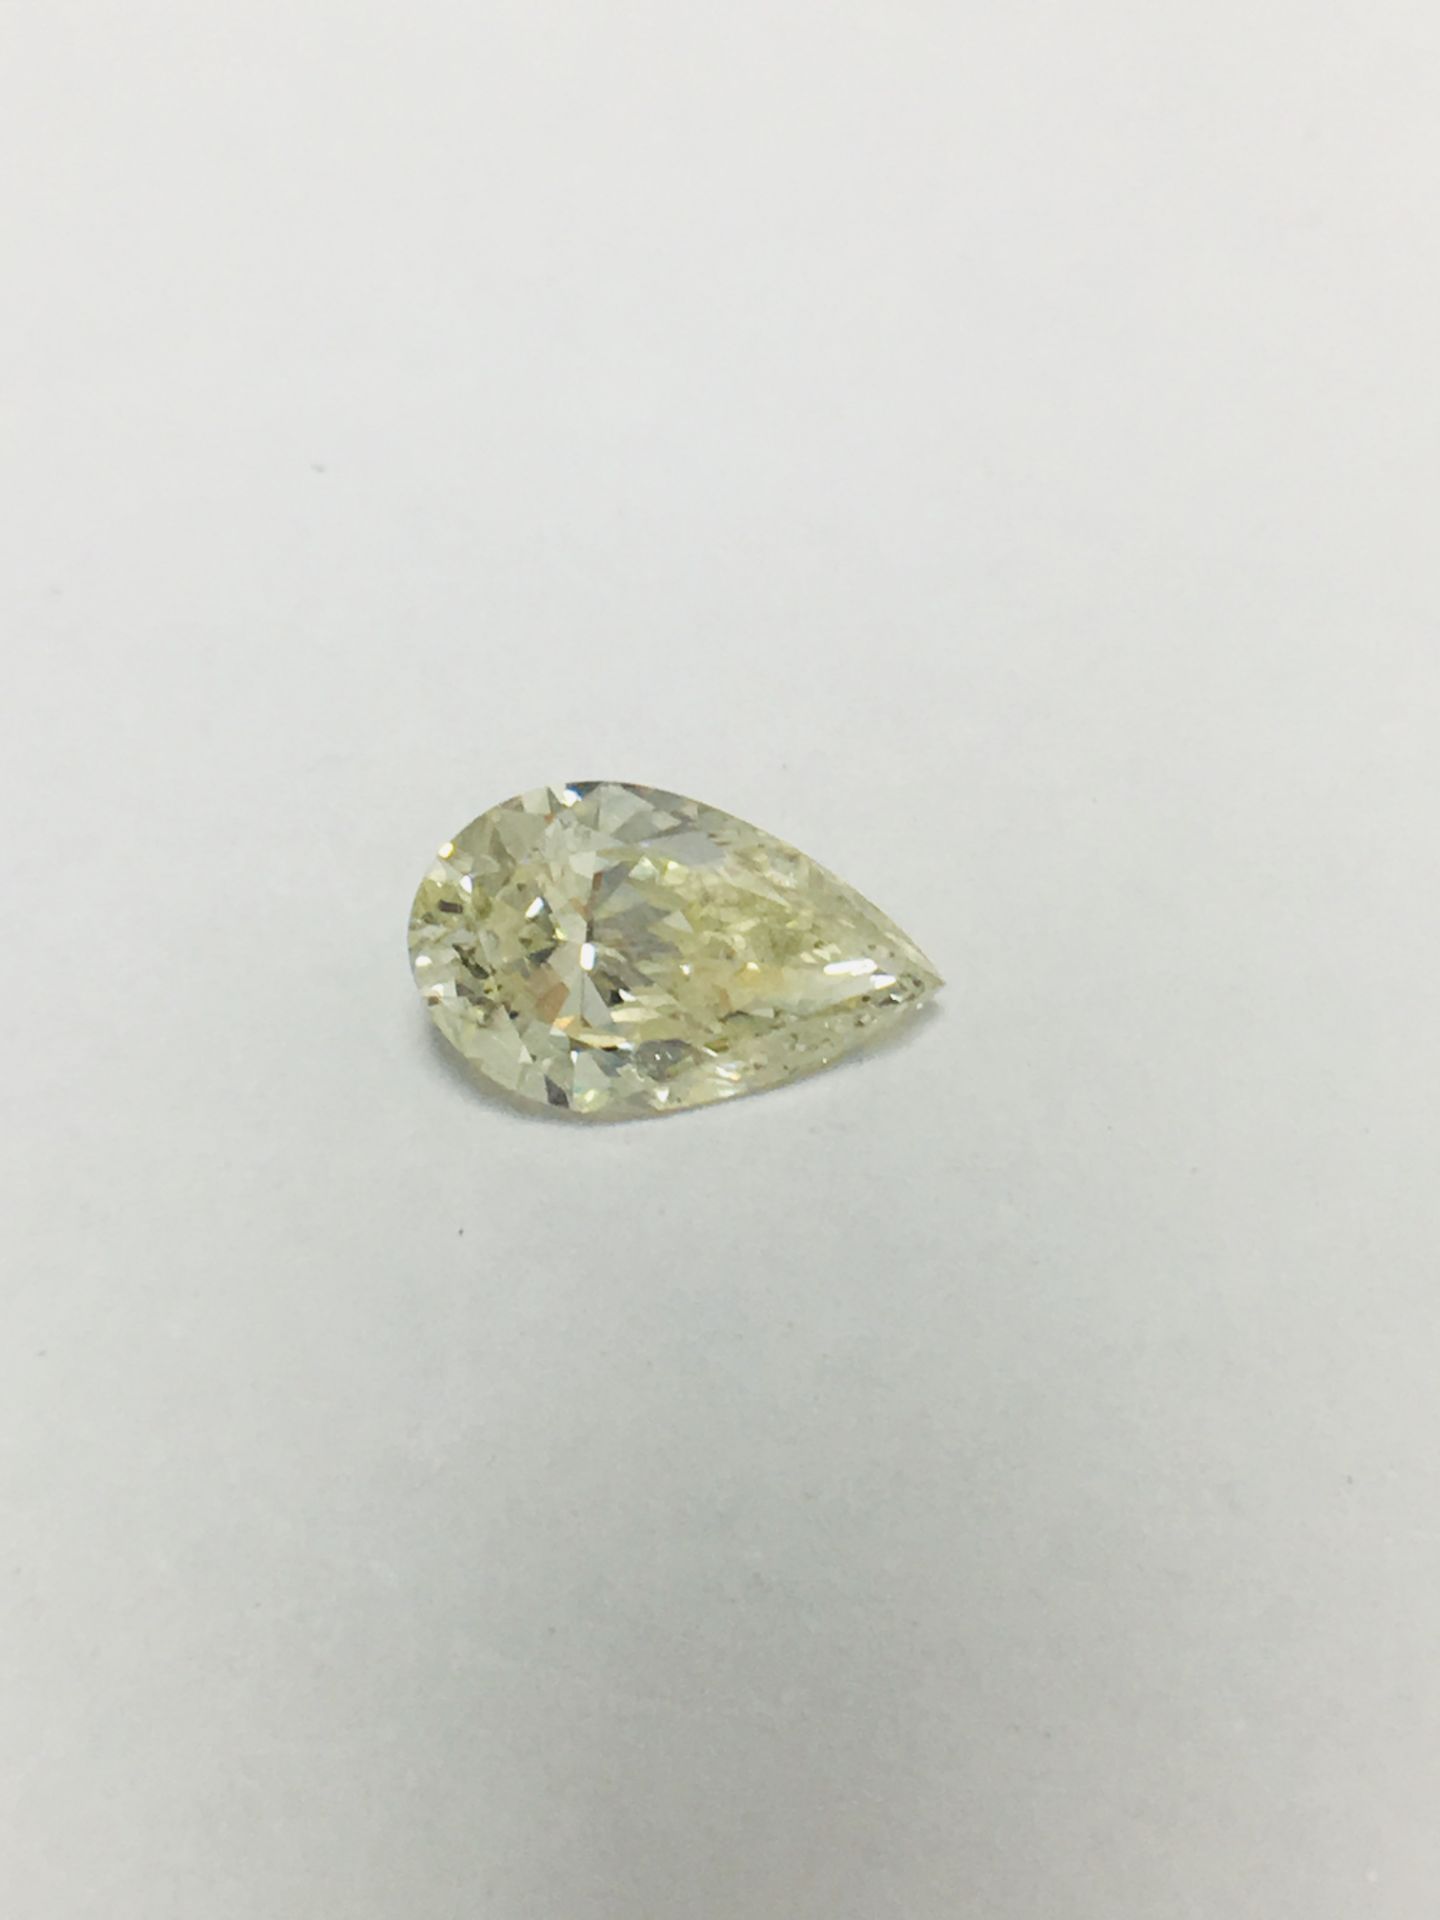 0.96ct Pearshape Natural diamond,VS Clarity,K colour,diamond is tested as clarity enhanced - Image 3 of 3